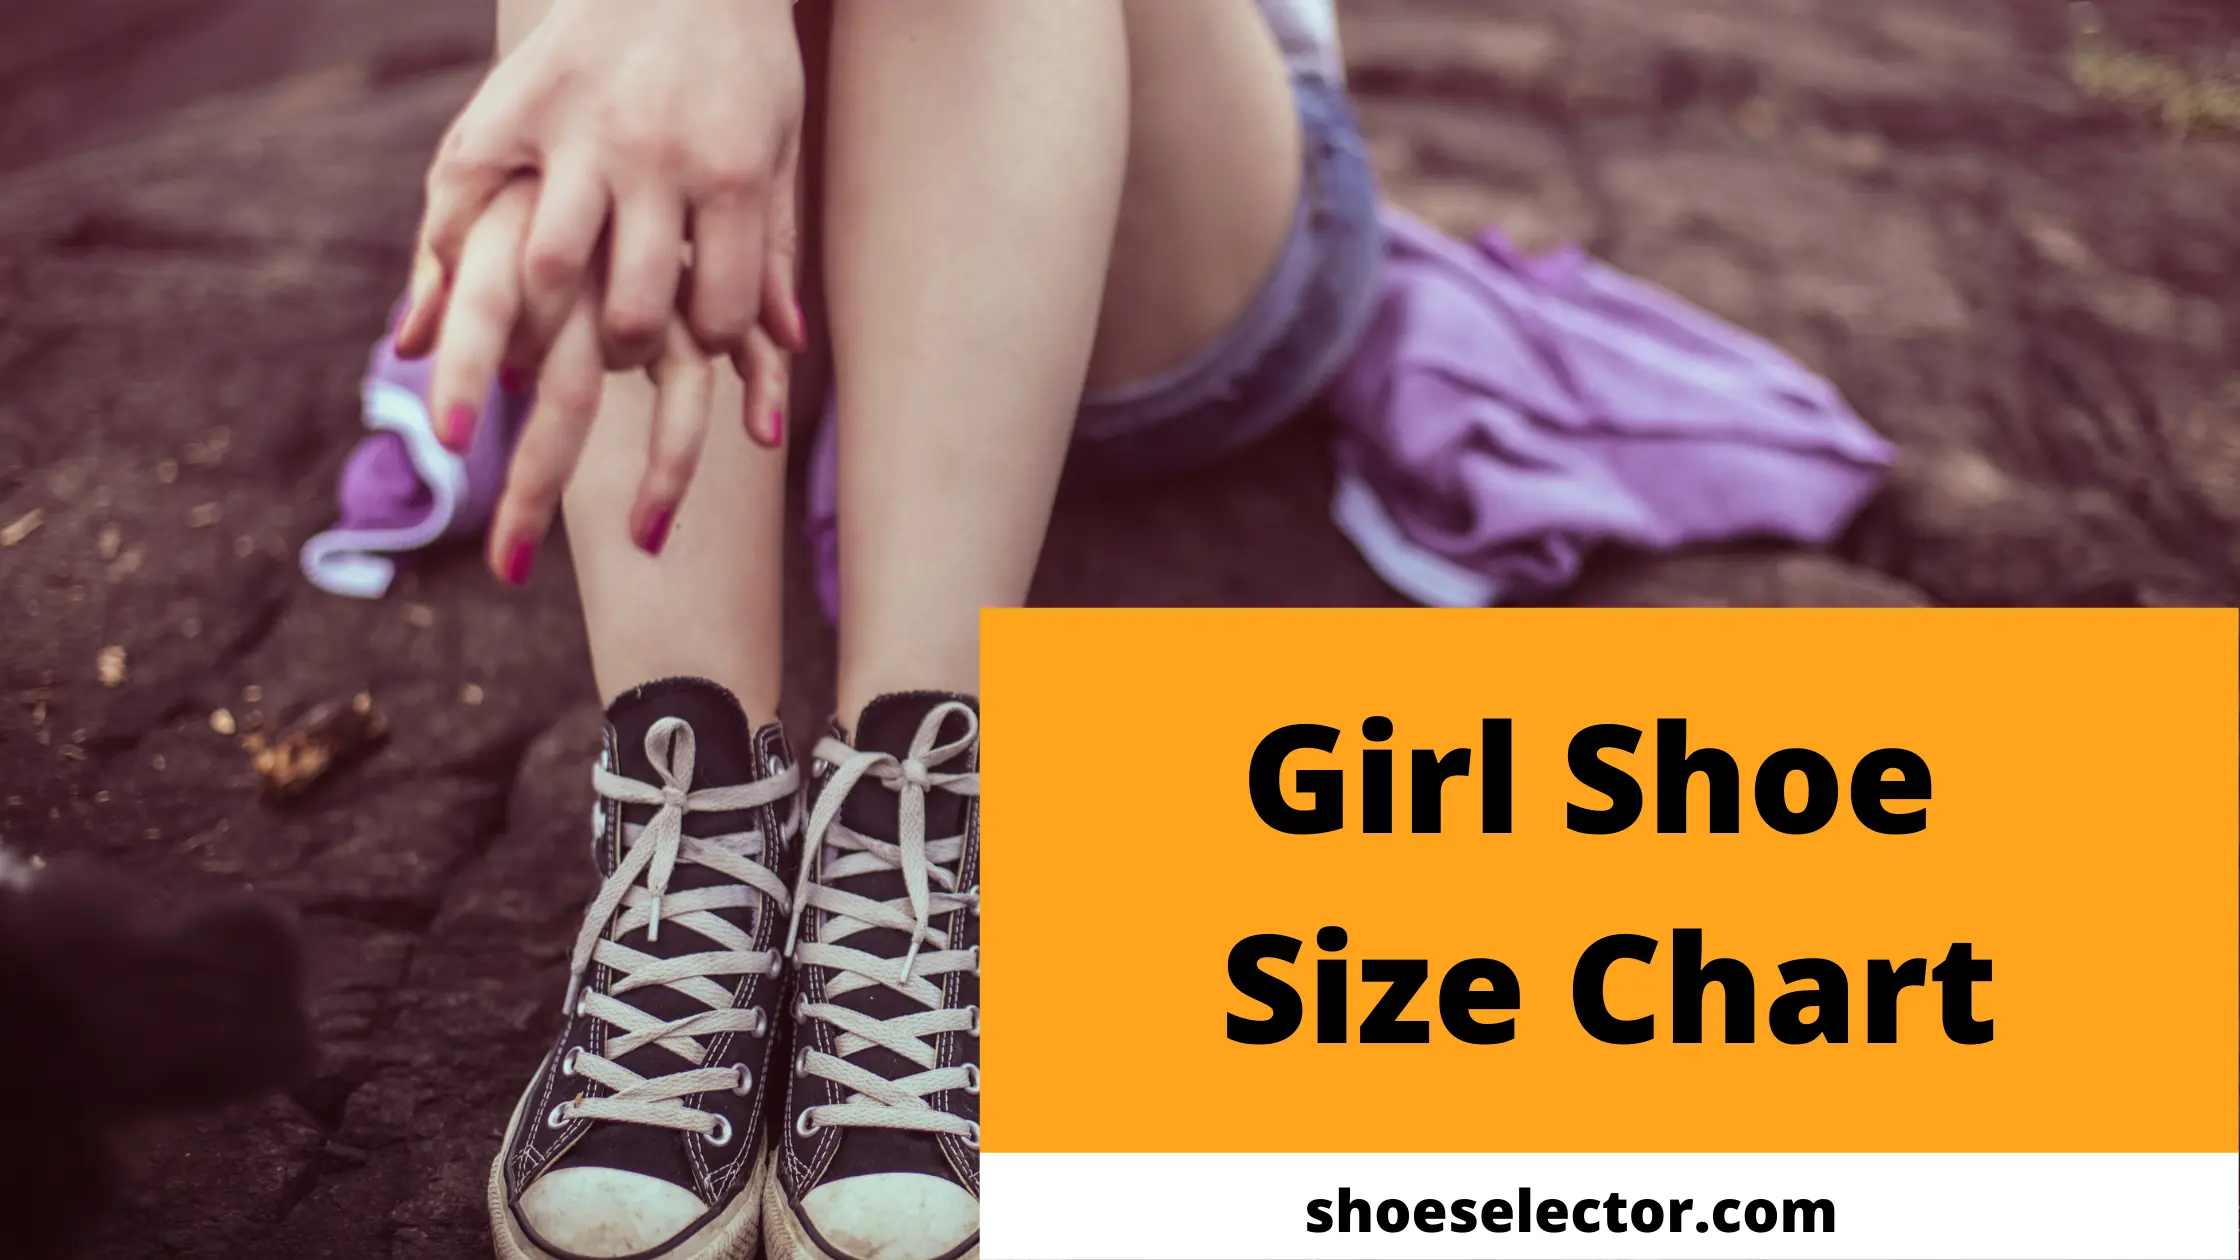 Girls Shoe Size Chart - The Essential Guide